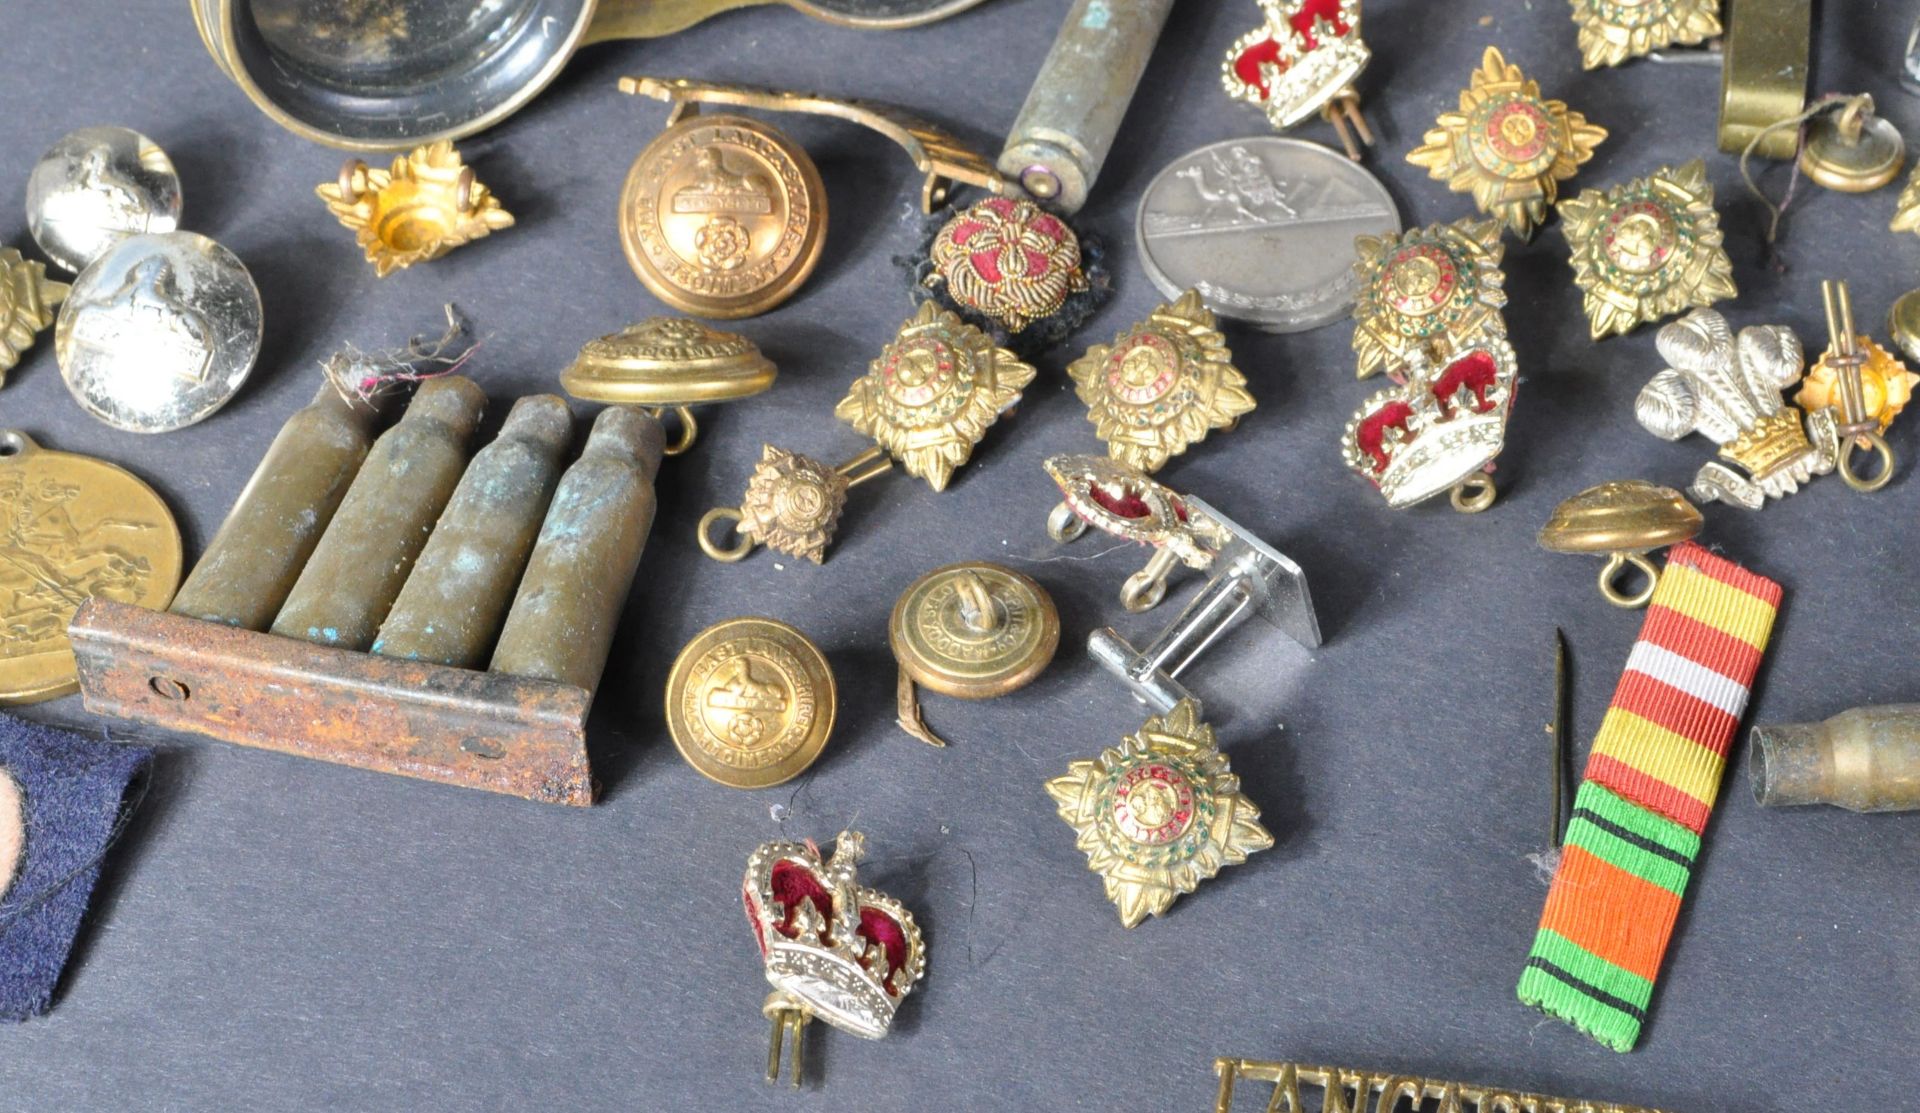 COLLECTION OF ASSORTED MILITARY RELATED ITEMS - BUTTONS, BADGES ETC - Image 6 of 6